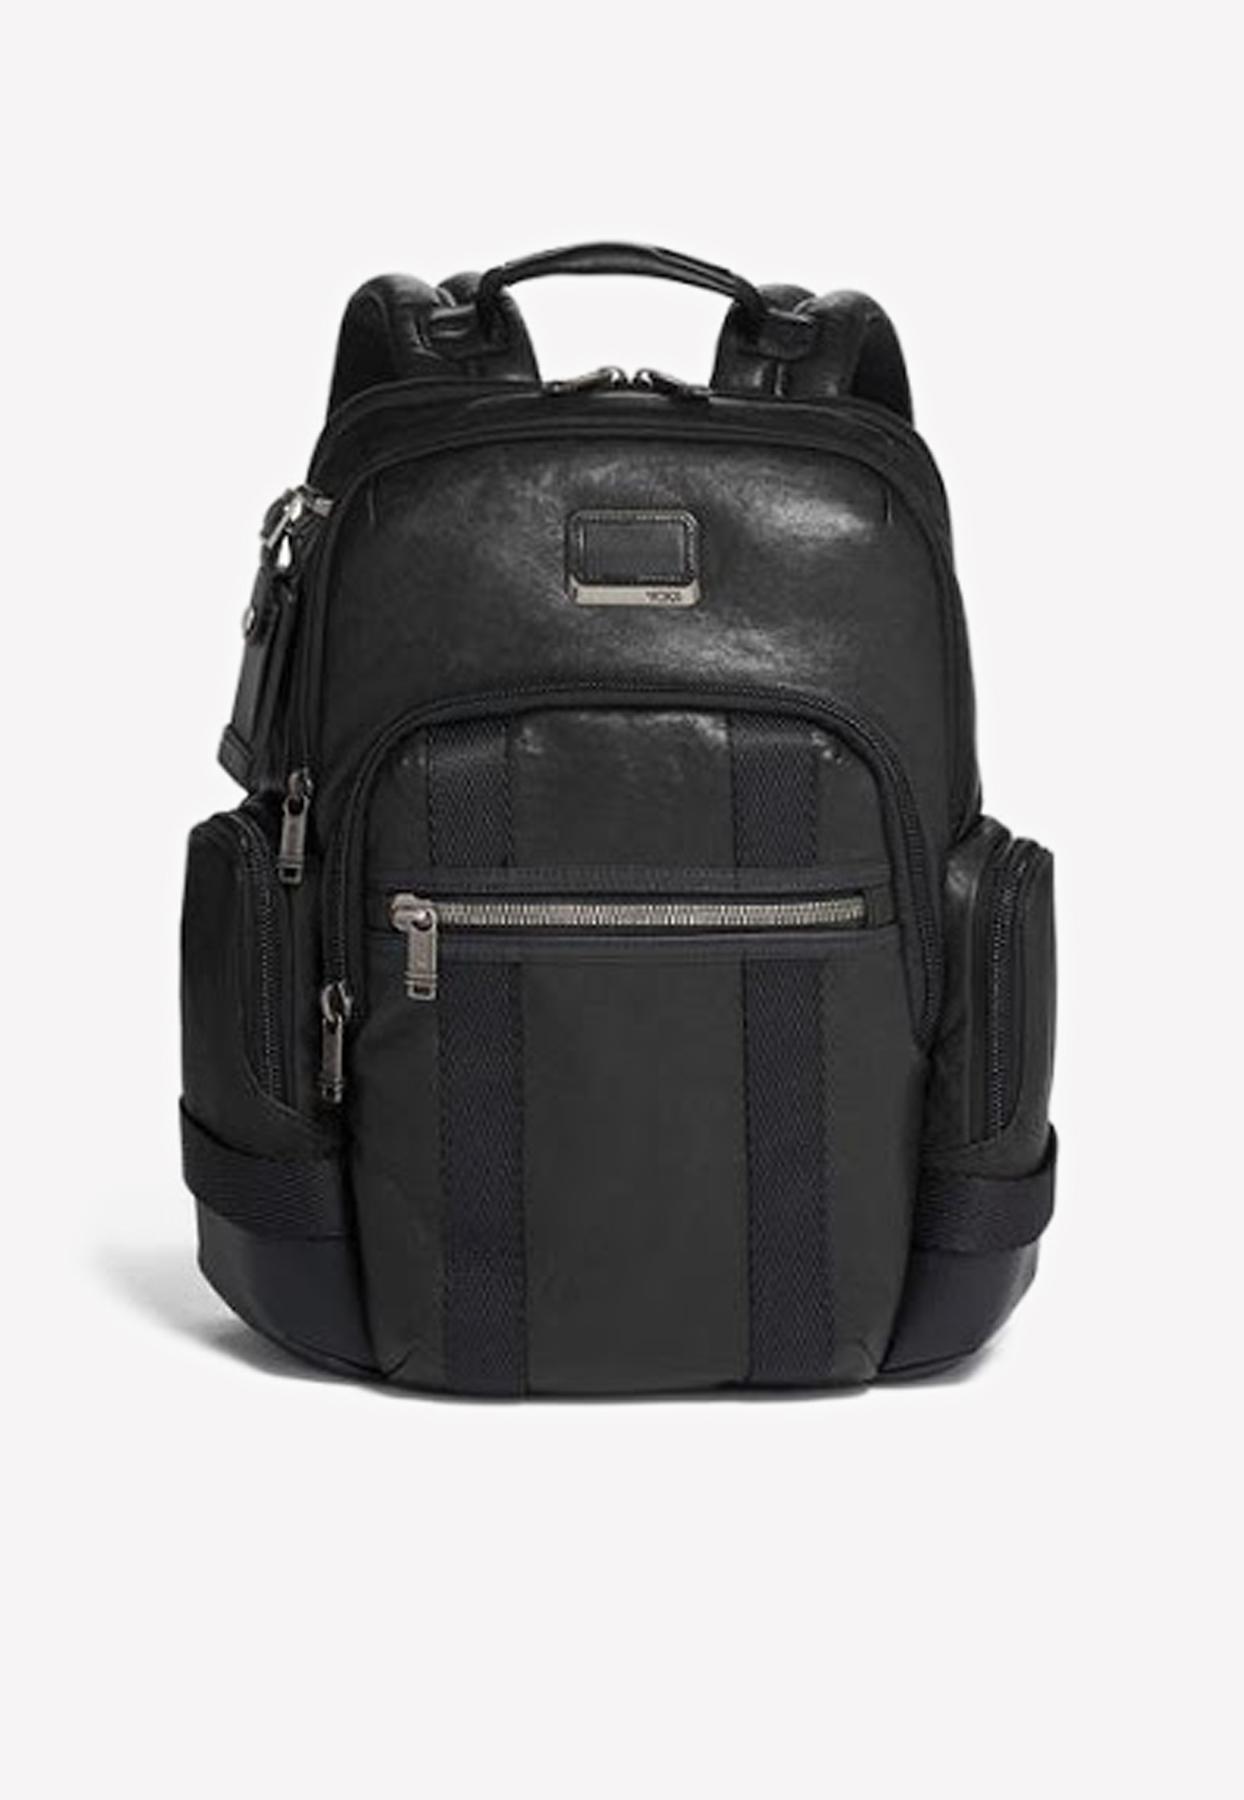 Tumi Alpha Bravo Norman Leather Backpack in Black for Men - Lyst